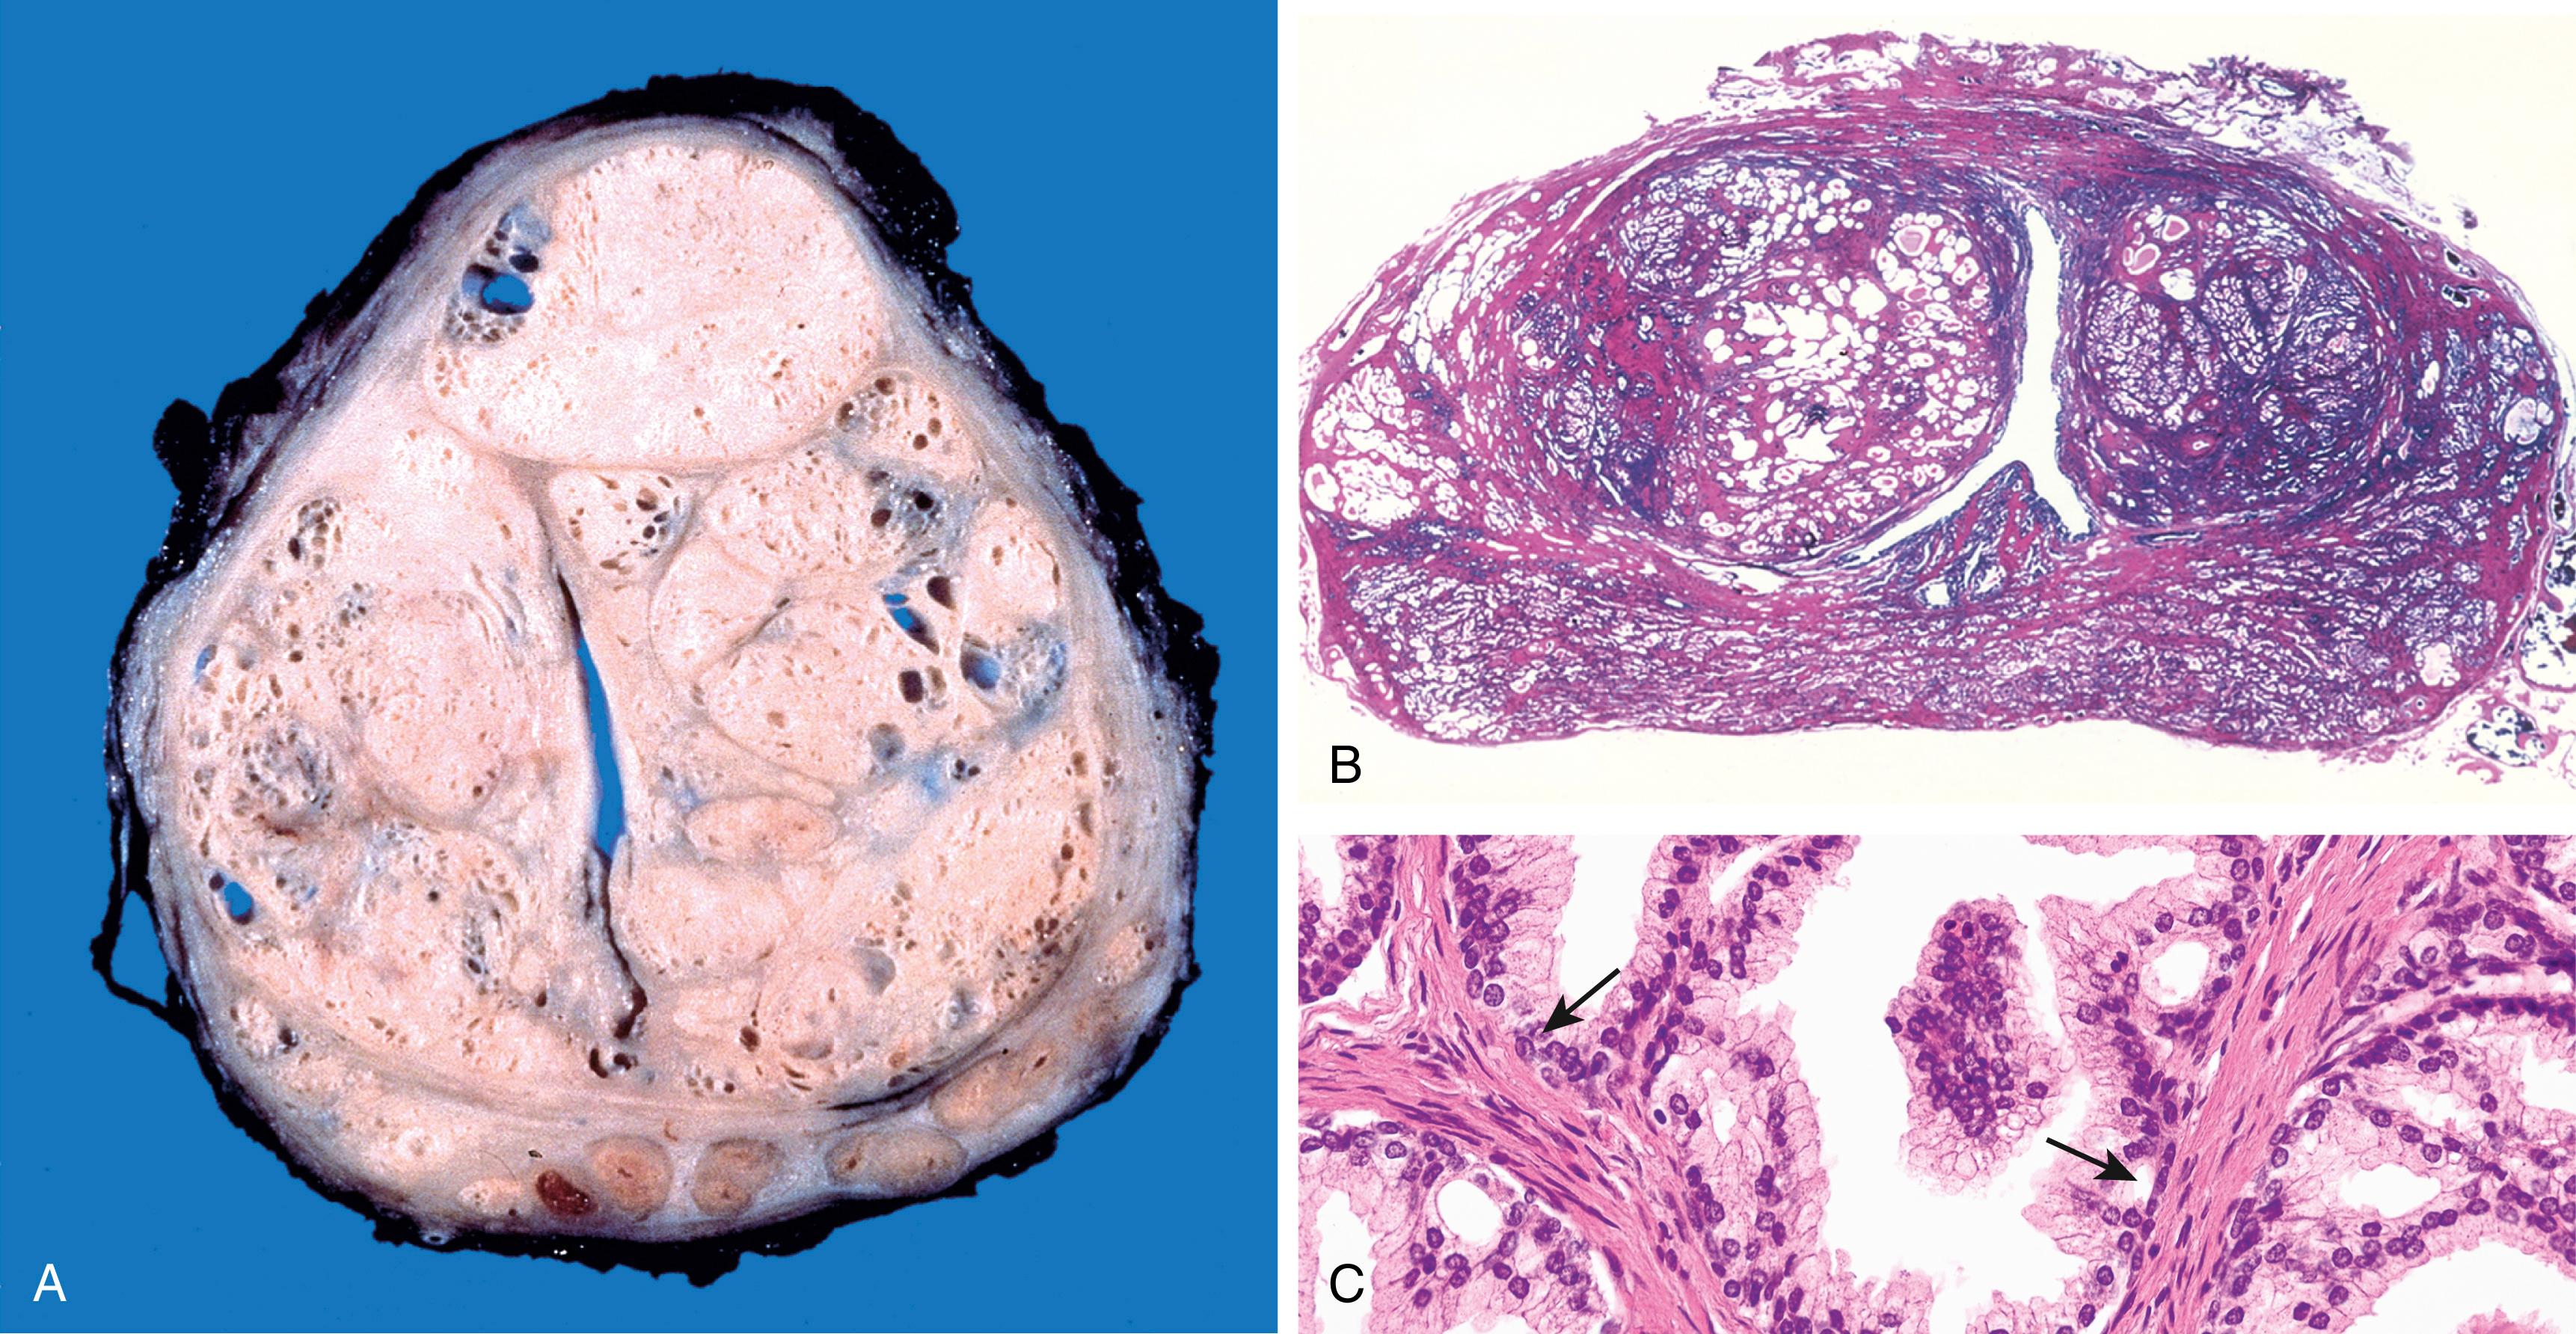 FIG. 16.11, Benign prostatic hyperplasia (BPH). (A) Well-defined nodules of BPH compress the urethra into a slitlike lumen. (B) Low-power photomicrograph demonstrates nodules of hyperplastic glands on both sides of the urethra. In other cases of nodular hyperplasia, the nodularity is caused predominantly by stromal, rather than glandular, proliferation. (C) Higher-power photomicrograph demonstrates the morphology of the hyperplastic glands, which are large and have papillary infoldings. Unlike prostatic adenocarcinoma, basal cells are present (arrows) .